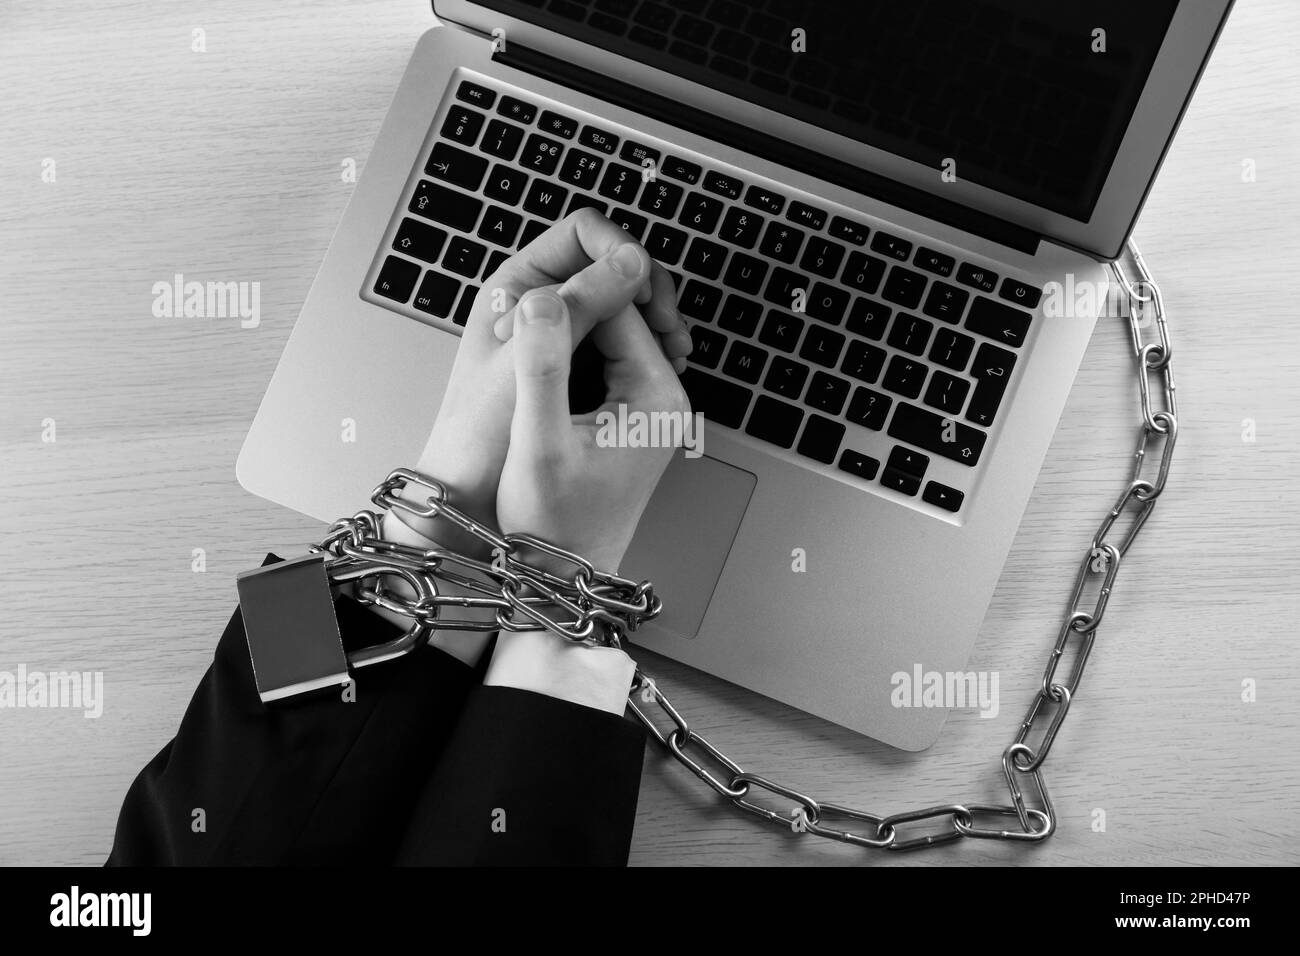 Top view of woman with chained hands and laptop at wooden table, black and white effect. Internet addiction Stock Photo